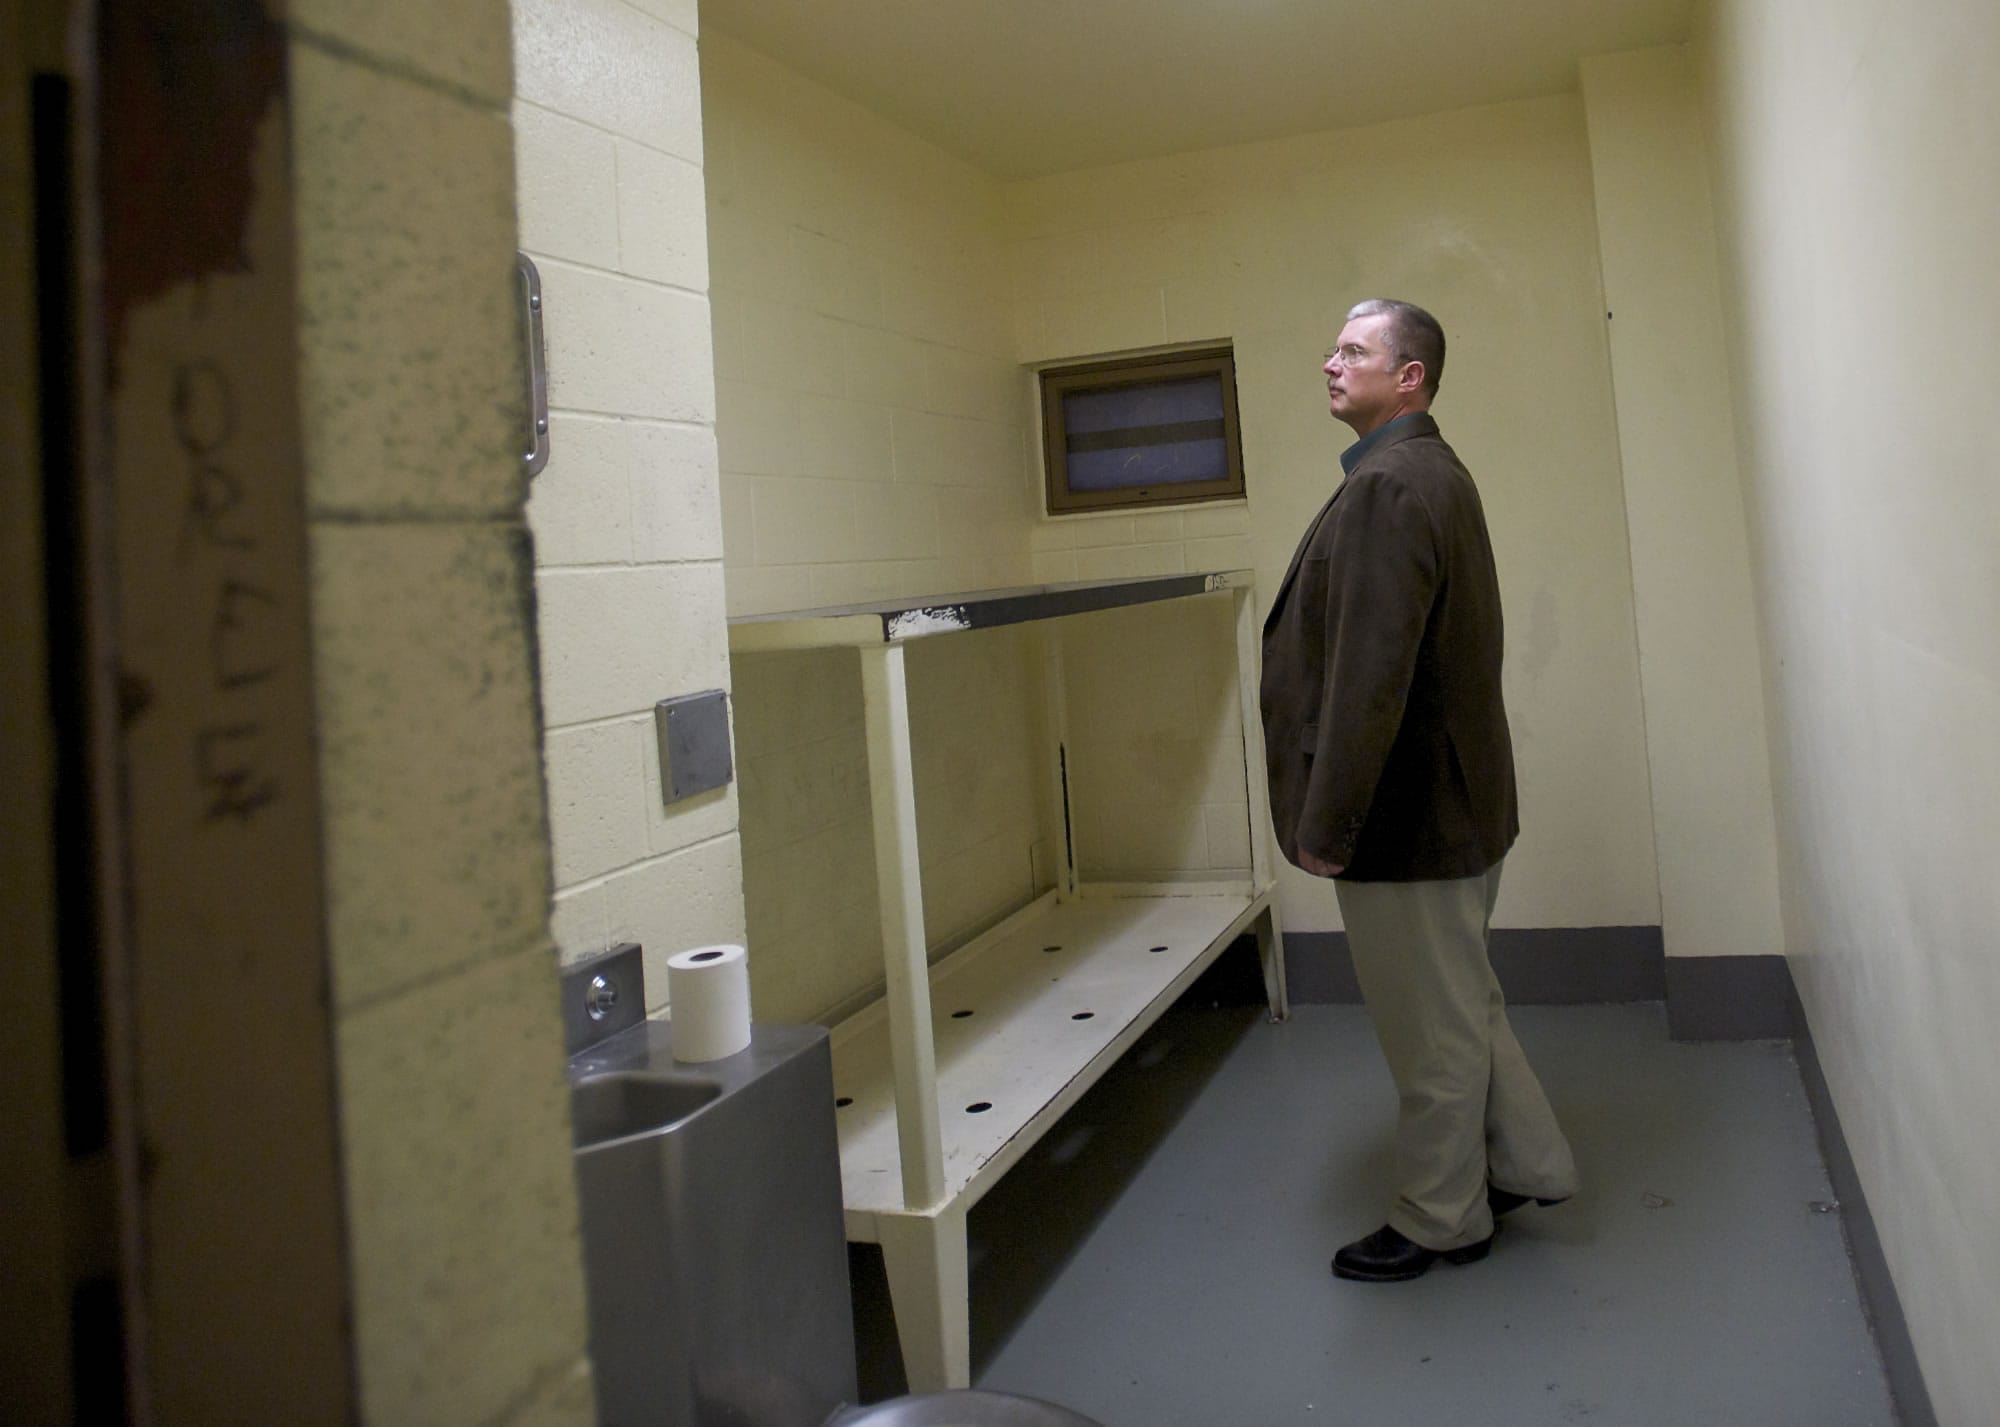 Clark County Sheriff's Commander Ric Bishop gives a tour of an empty cell inside A Pod, the housing unit for inmates on suicide watch.